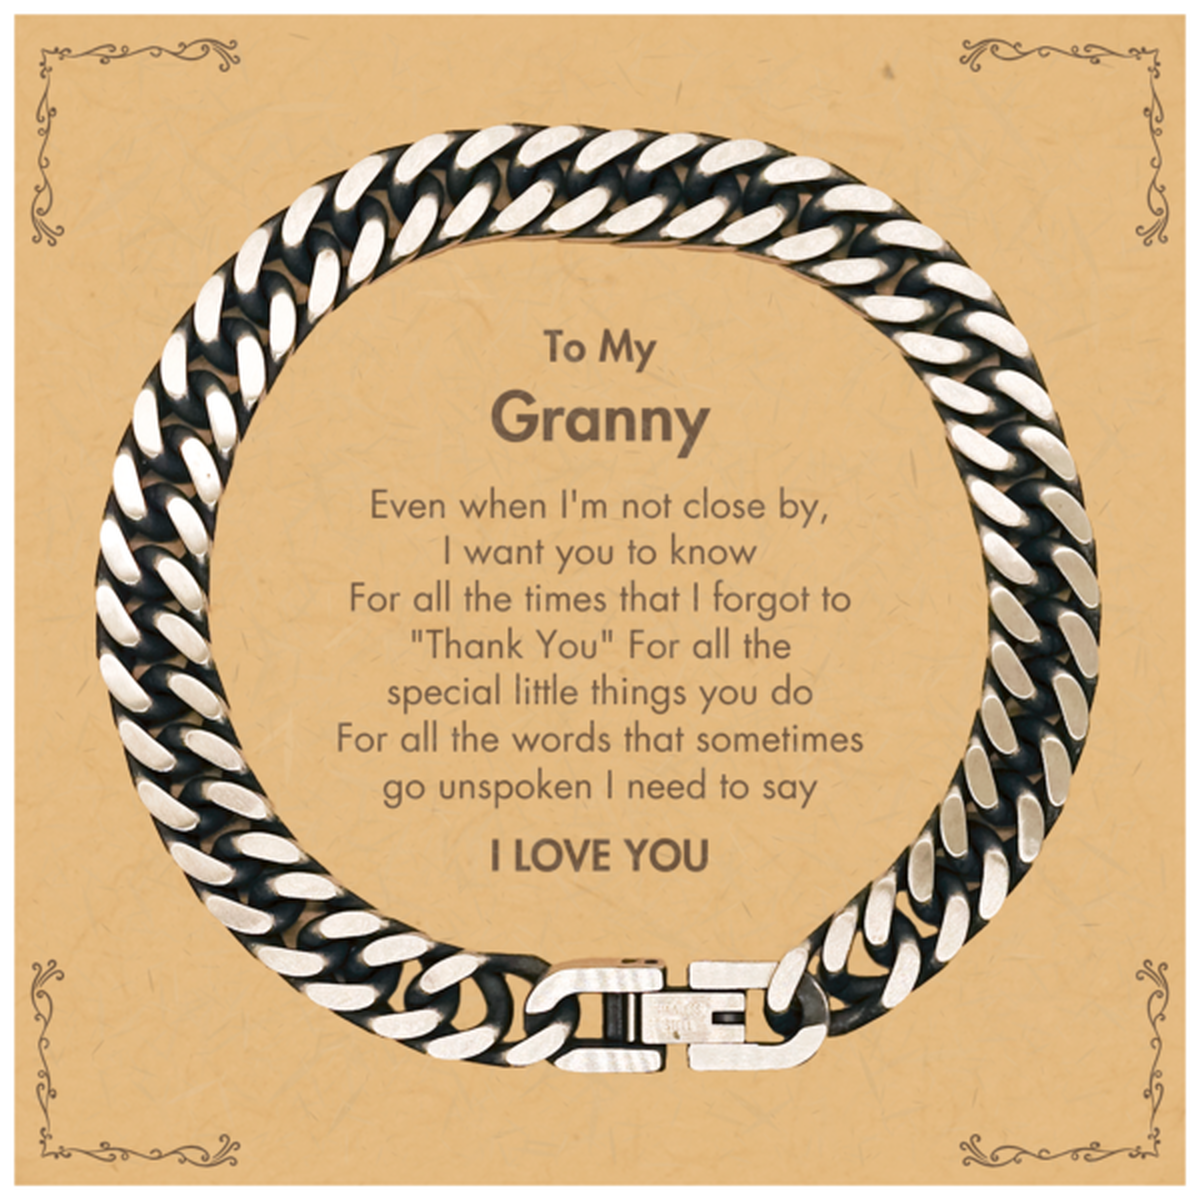 Thank You Gifts for Granny, Keepsake Cuban Link Chain Bracelet Gifts for Granny Birthday Mother's day Father's Day Granny For all the words That sometimes go unspoken I need to say I LOVE YOU